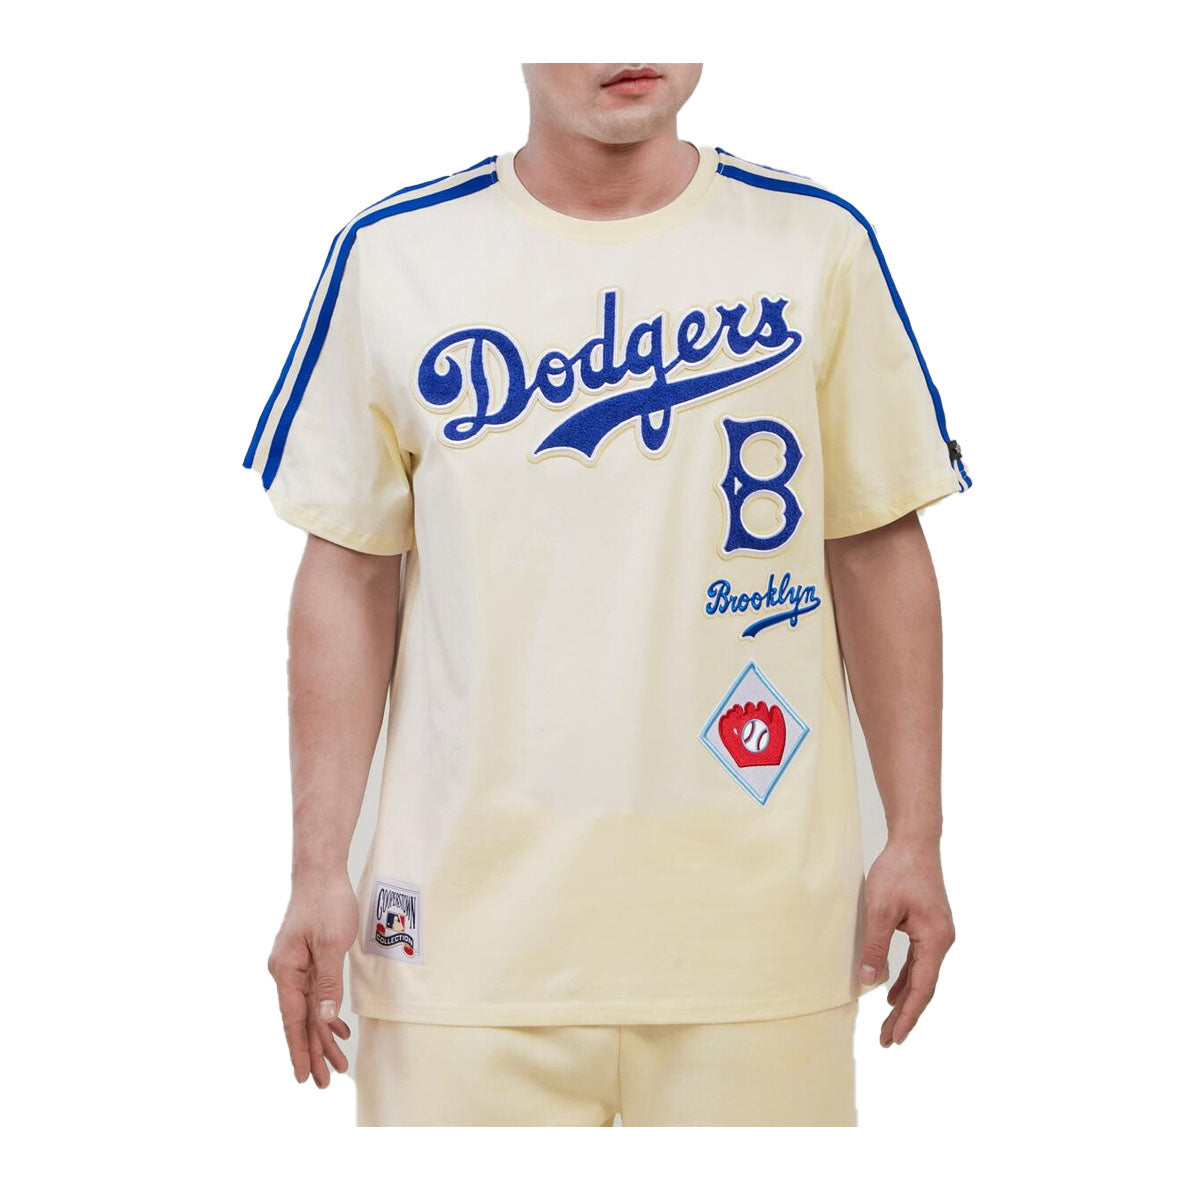 Authentic Pewee Reese Brooklyn Dodgers top men's xl